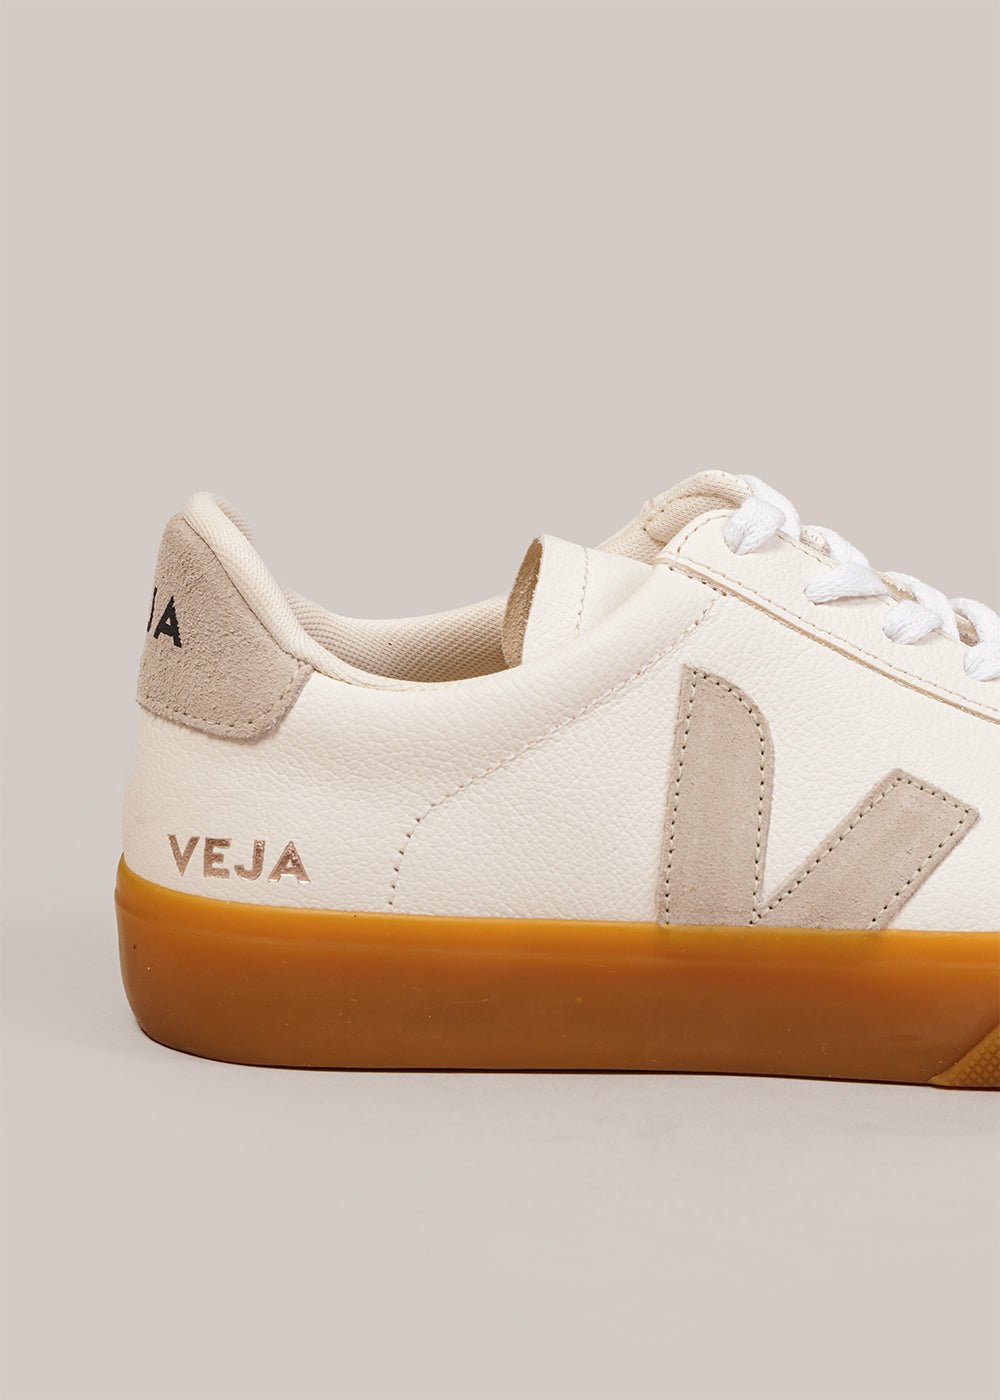 Veja Extra-White Natural Campo Sneakers - New Classics Studios Sustainable Ethical Fashion Canada